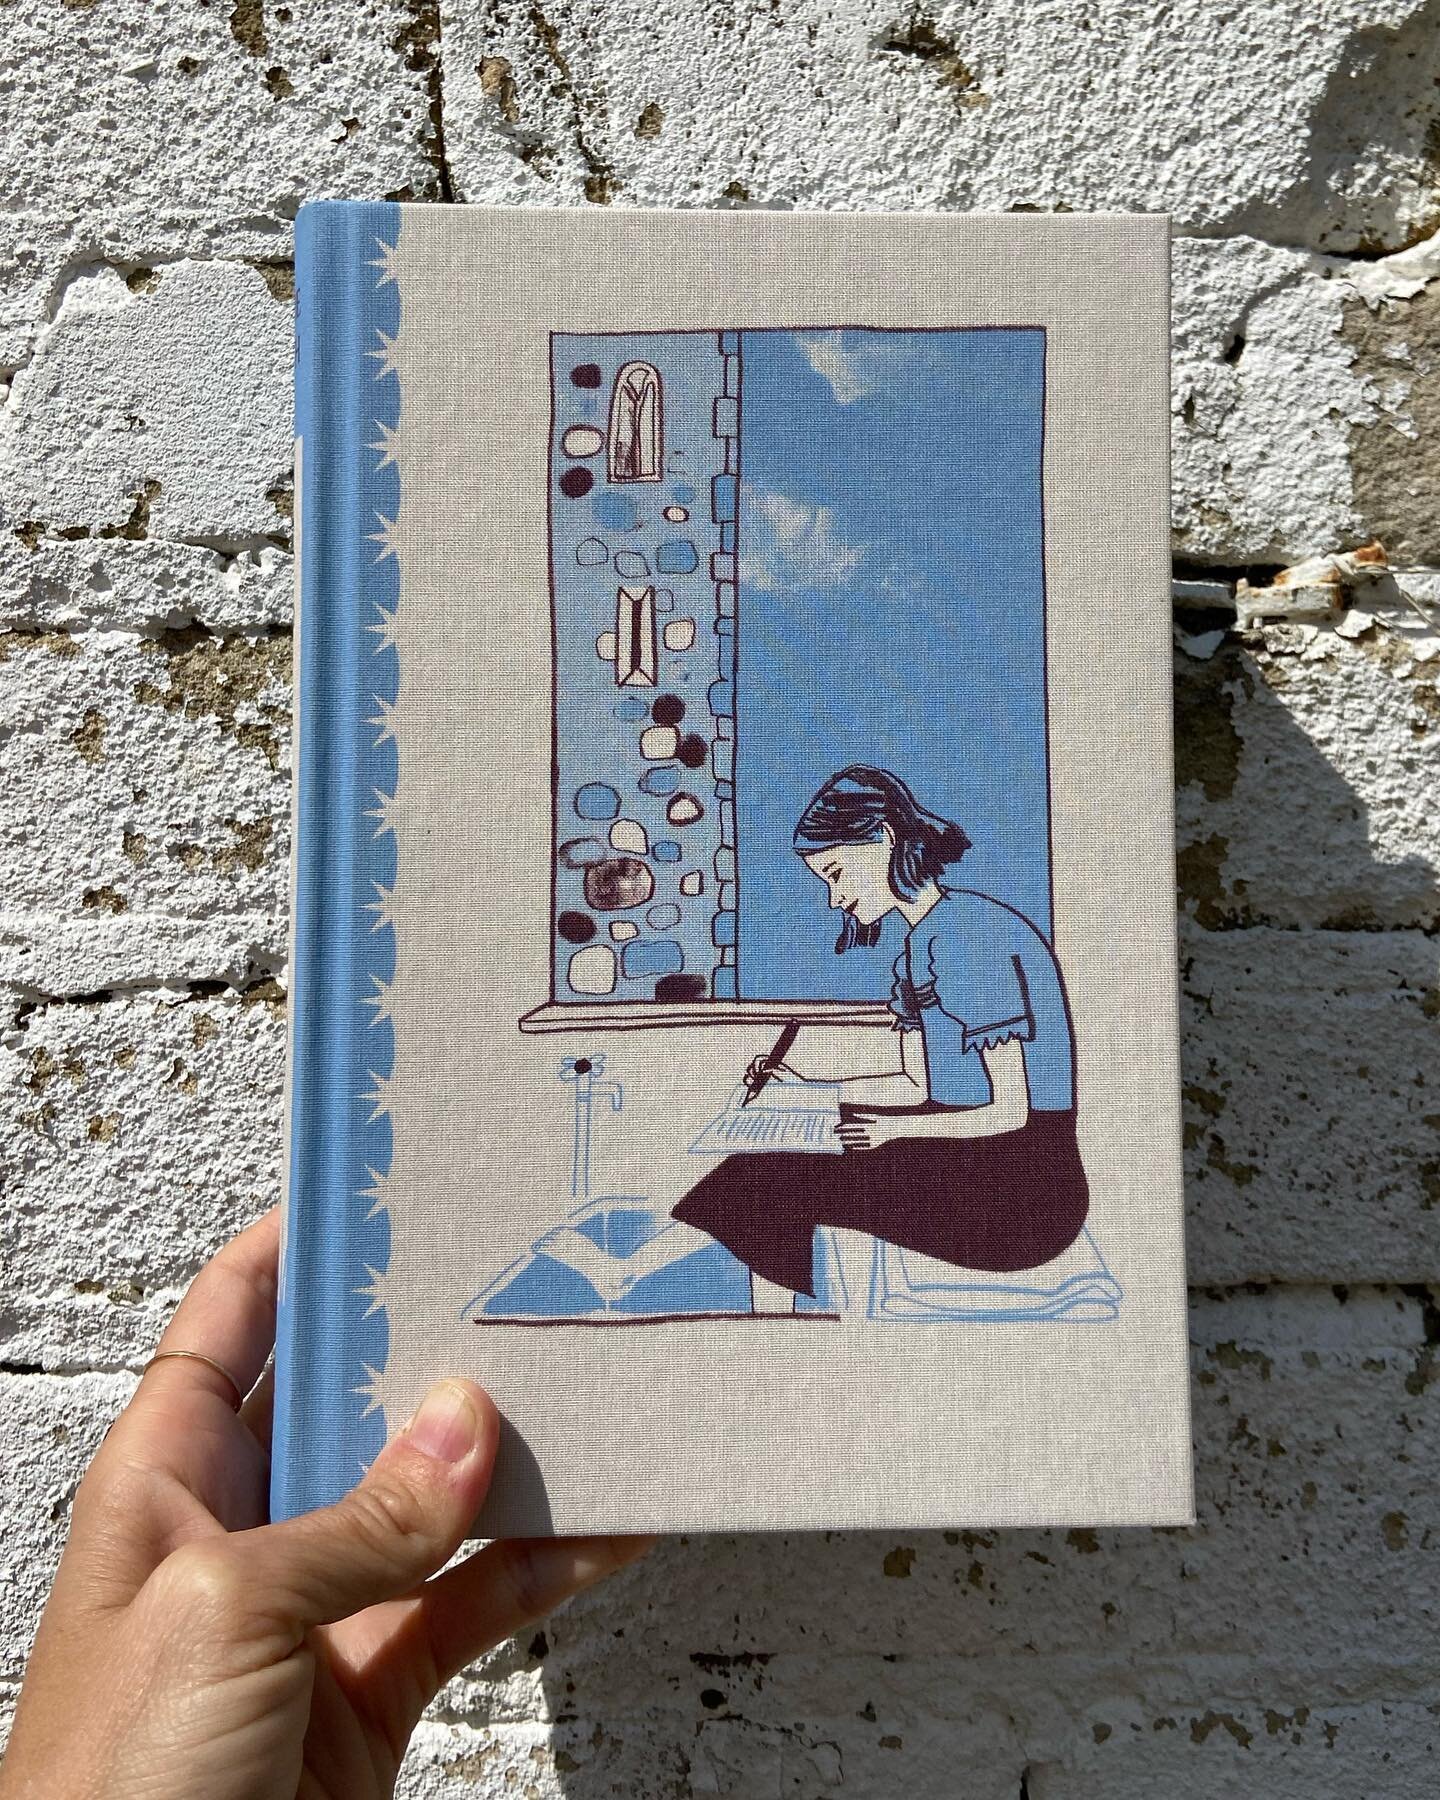 My cover for I Capture the Castle by Dodie Smith, published by @foliosociety 
.
Lots of testing of potential cover ideas and layouts before settling on the iconic first line. 
.
Printed beautifully in litho on off white cloth 😍 with its own slipcase